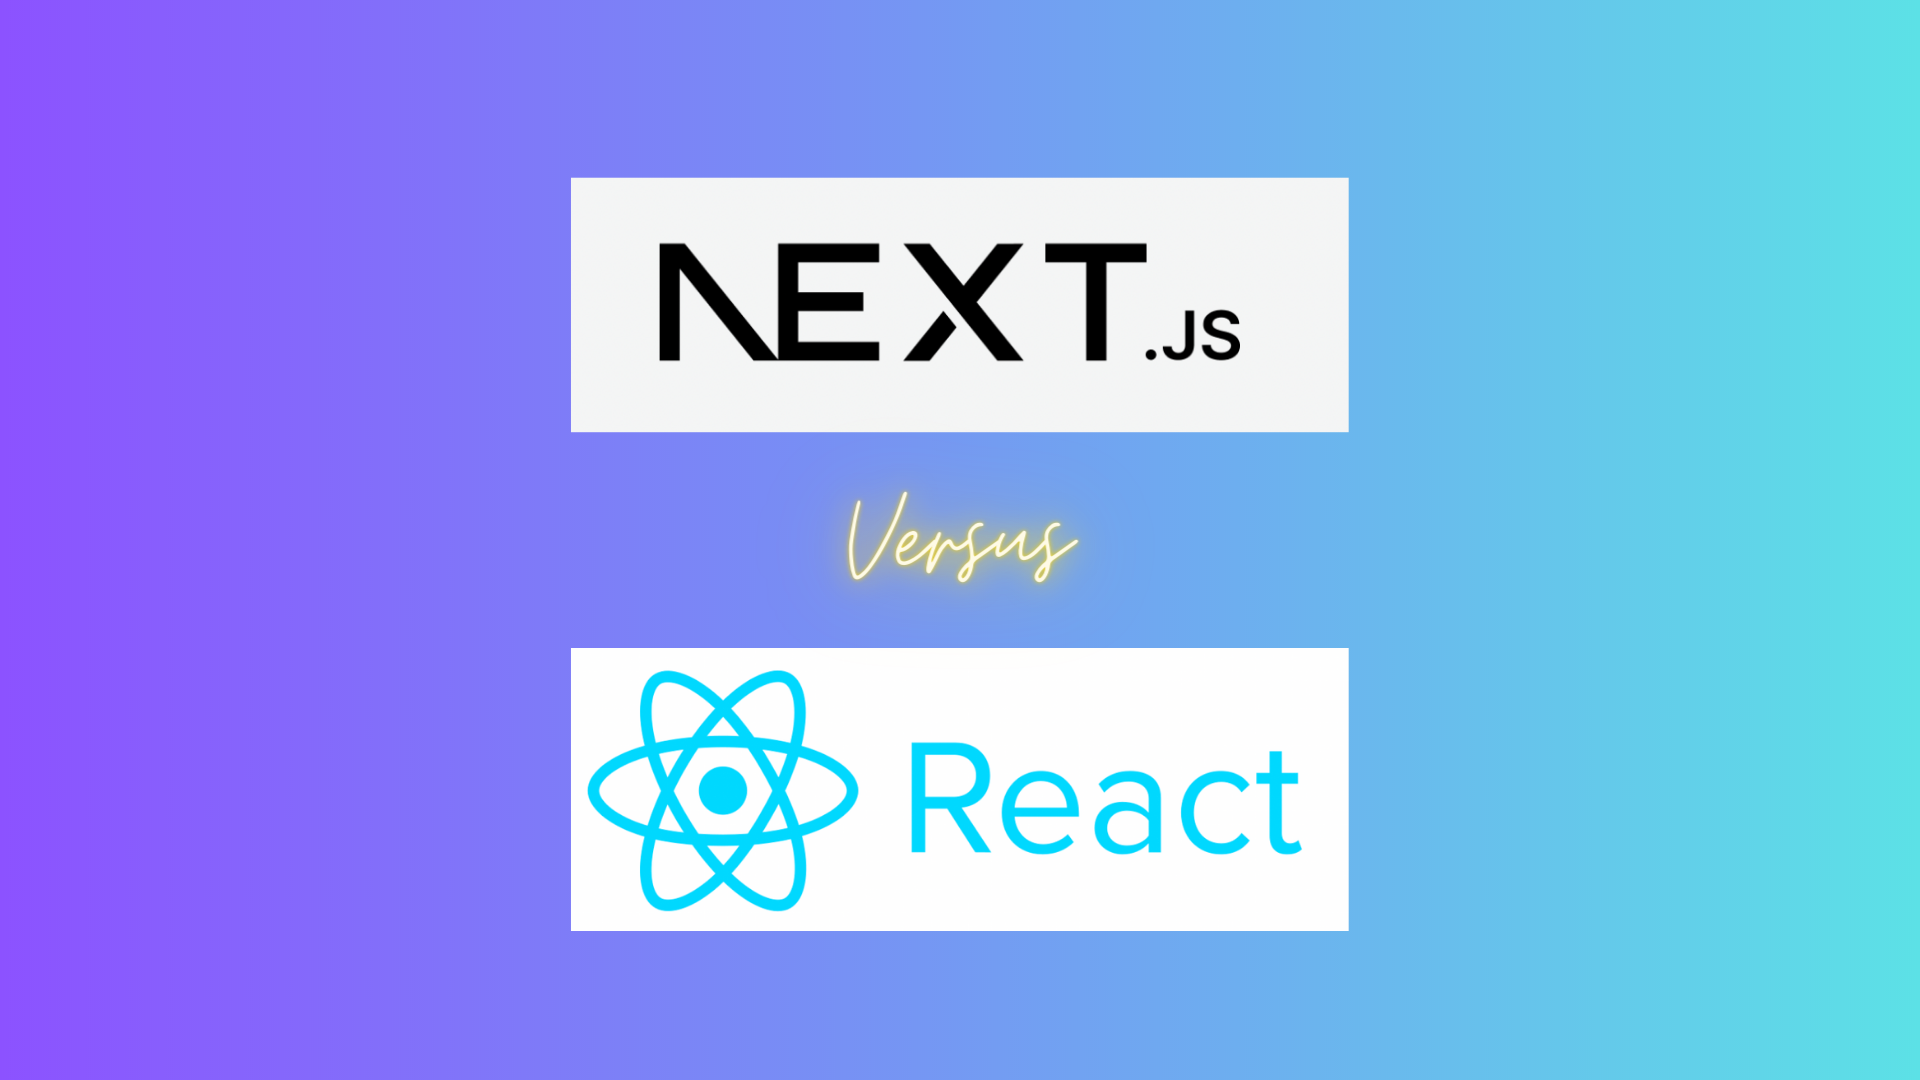 Logos for Next.js and React on a purple and blue background